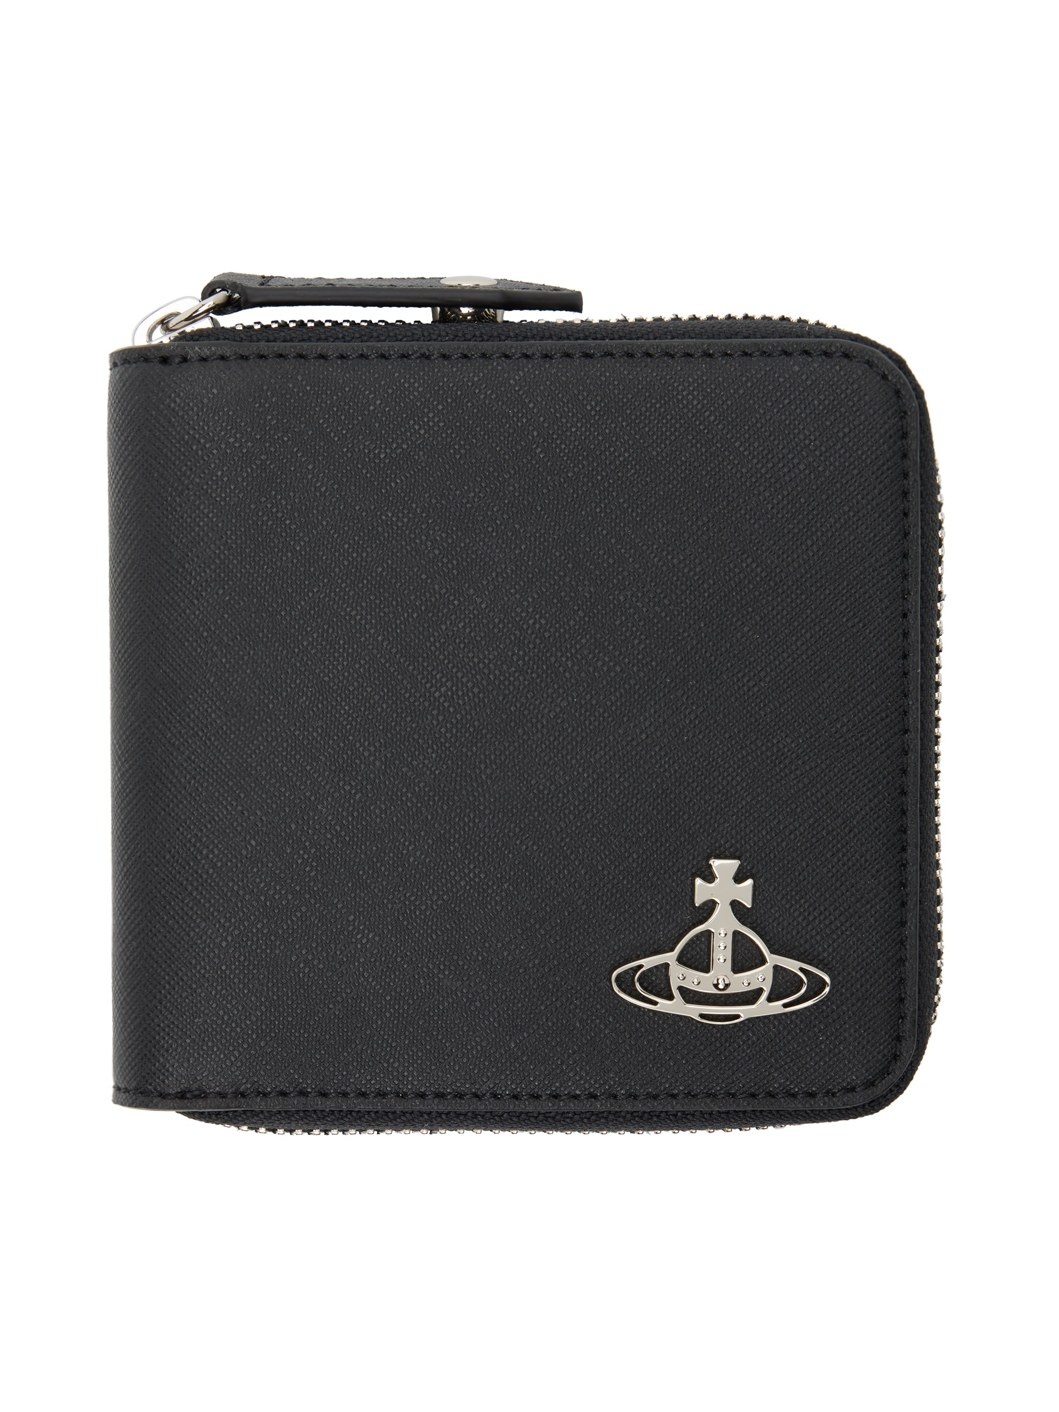 Black Saffiano Biogreen Rounded Square Wallet - 1